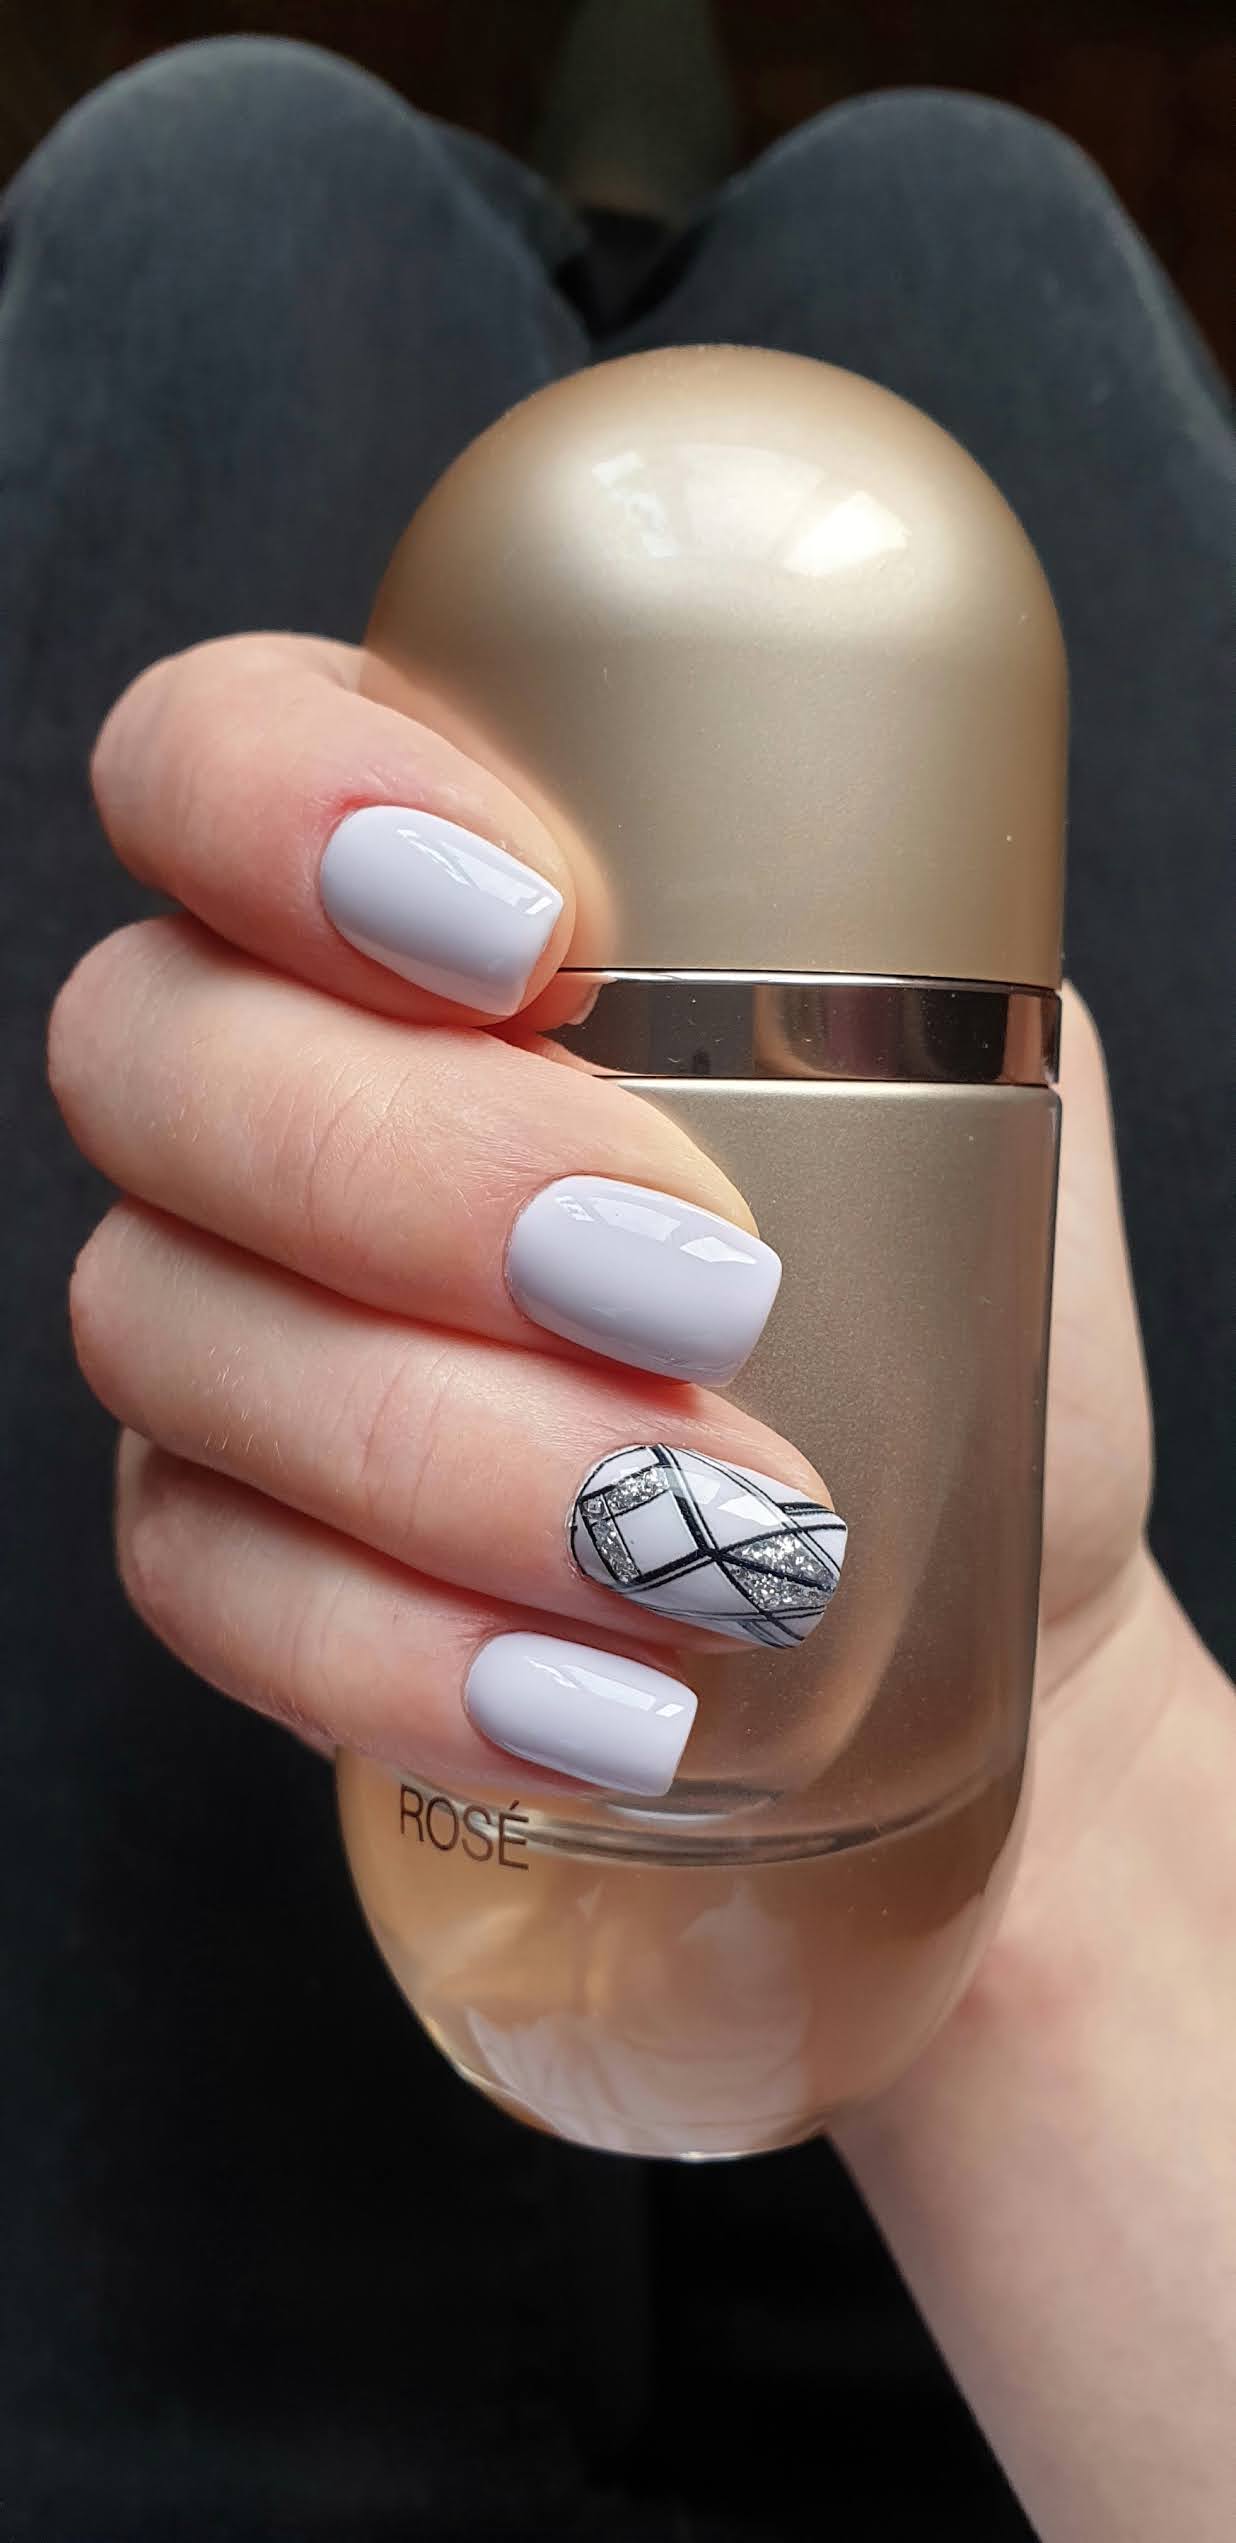 Ideas For Nail Art: 9 Cute Nail Art Trends You Can Do At Home